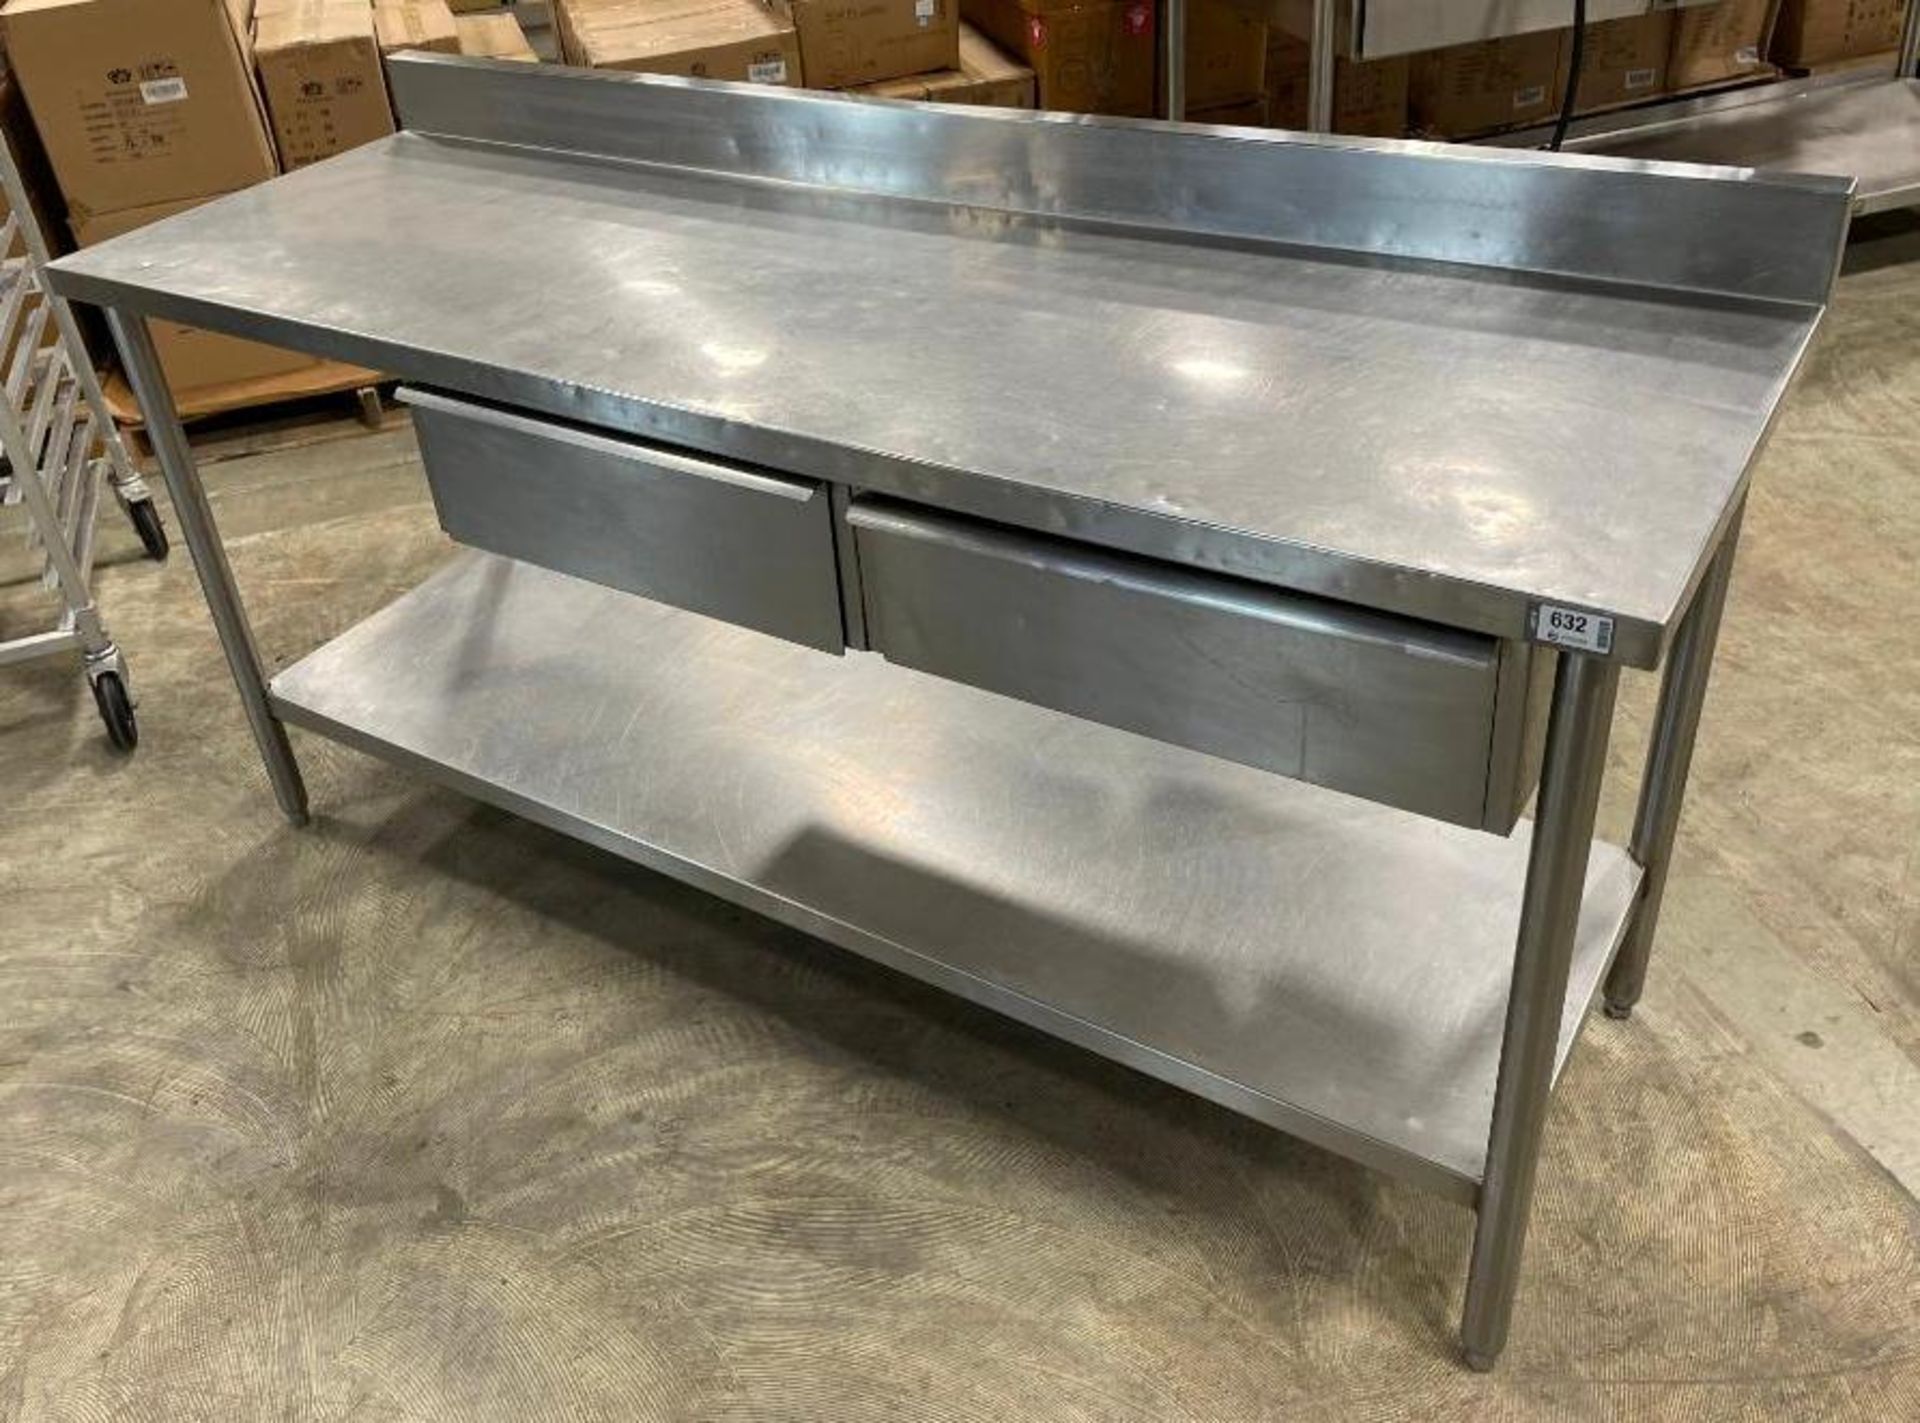 6' STAINLESS STEEL WORK TABLE WITH 2 DRAWERS AND UNDERSHELF